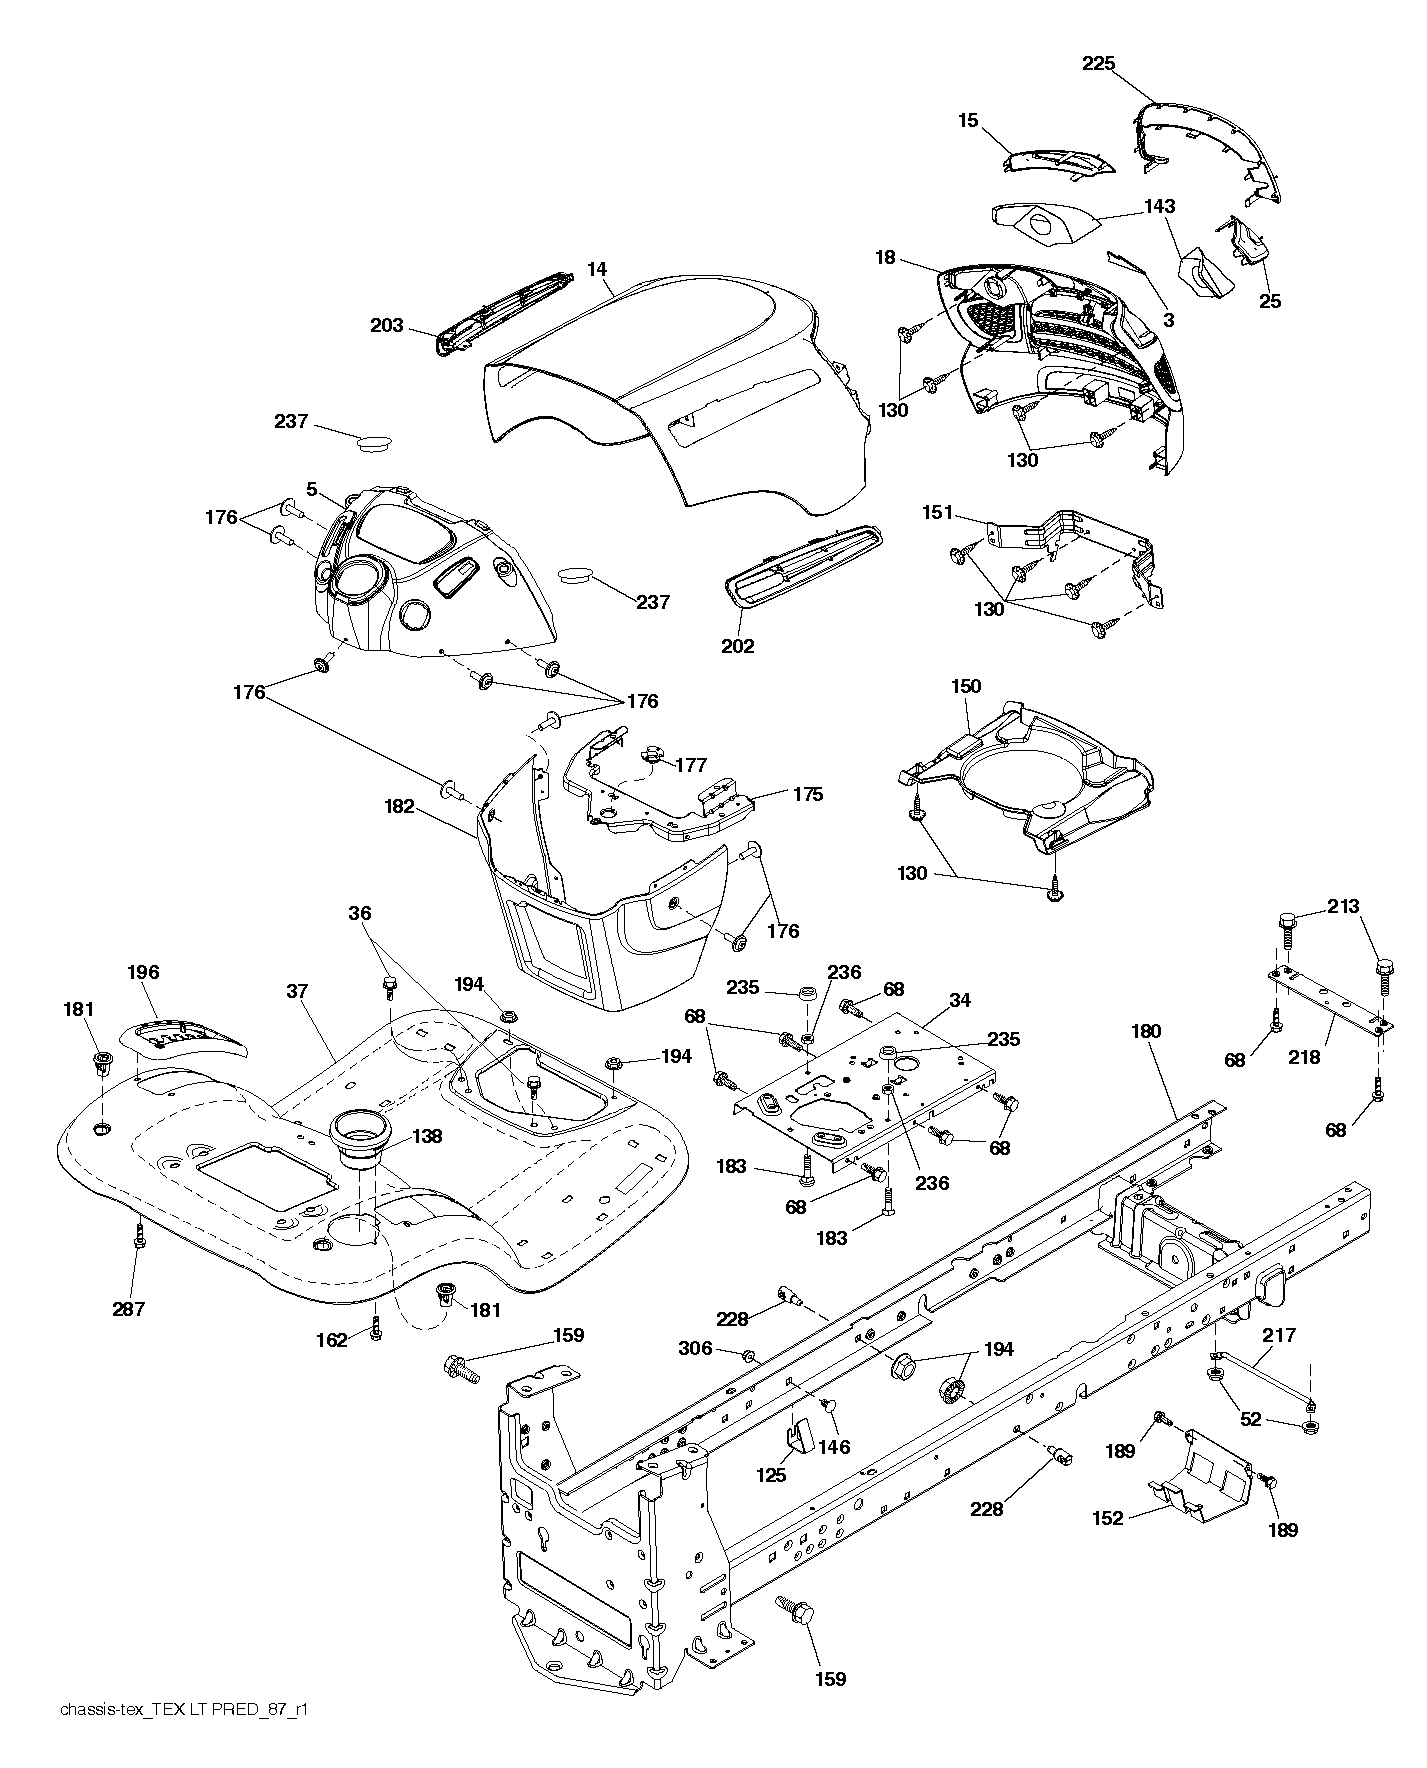 Chassis and appendix 578897101, 583745601, 587484601, 581055801, 581010701, 581055901, 580910801, 596030701, 532420796, 596040501, 596030701, 581684801, 596321701, 532409730, 581056002, 581857901, 532400267, 532187568, 531169901, 817000612, 532142432, 532199472, 532400776, 532195228, 532195457, 532404796, 532407176, 874520520, 532428867, 873900500, 532414581, 581564901, 581564801, 596030501, 532409167, 532196395, 581056201, 593824001, 532406129, 873930500, 532403704, 817600406, 532409149